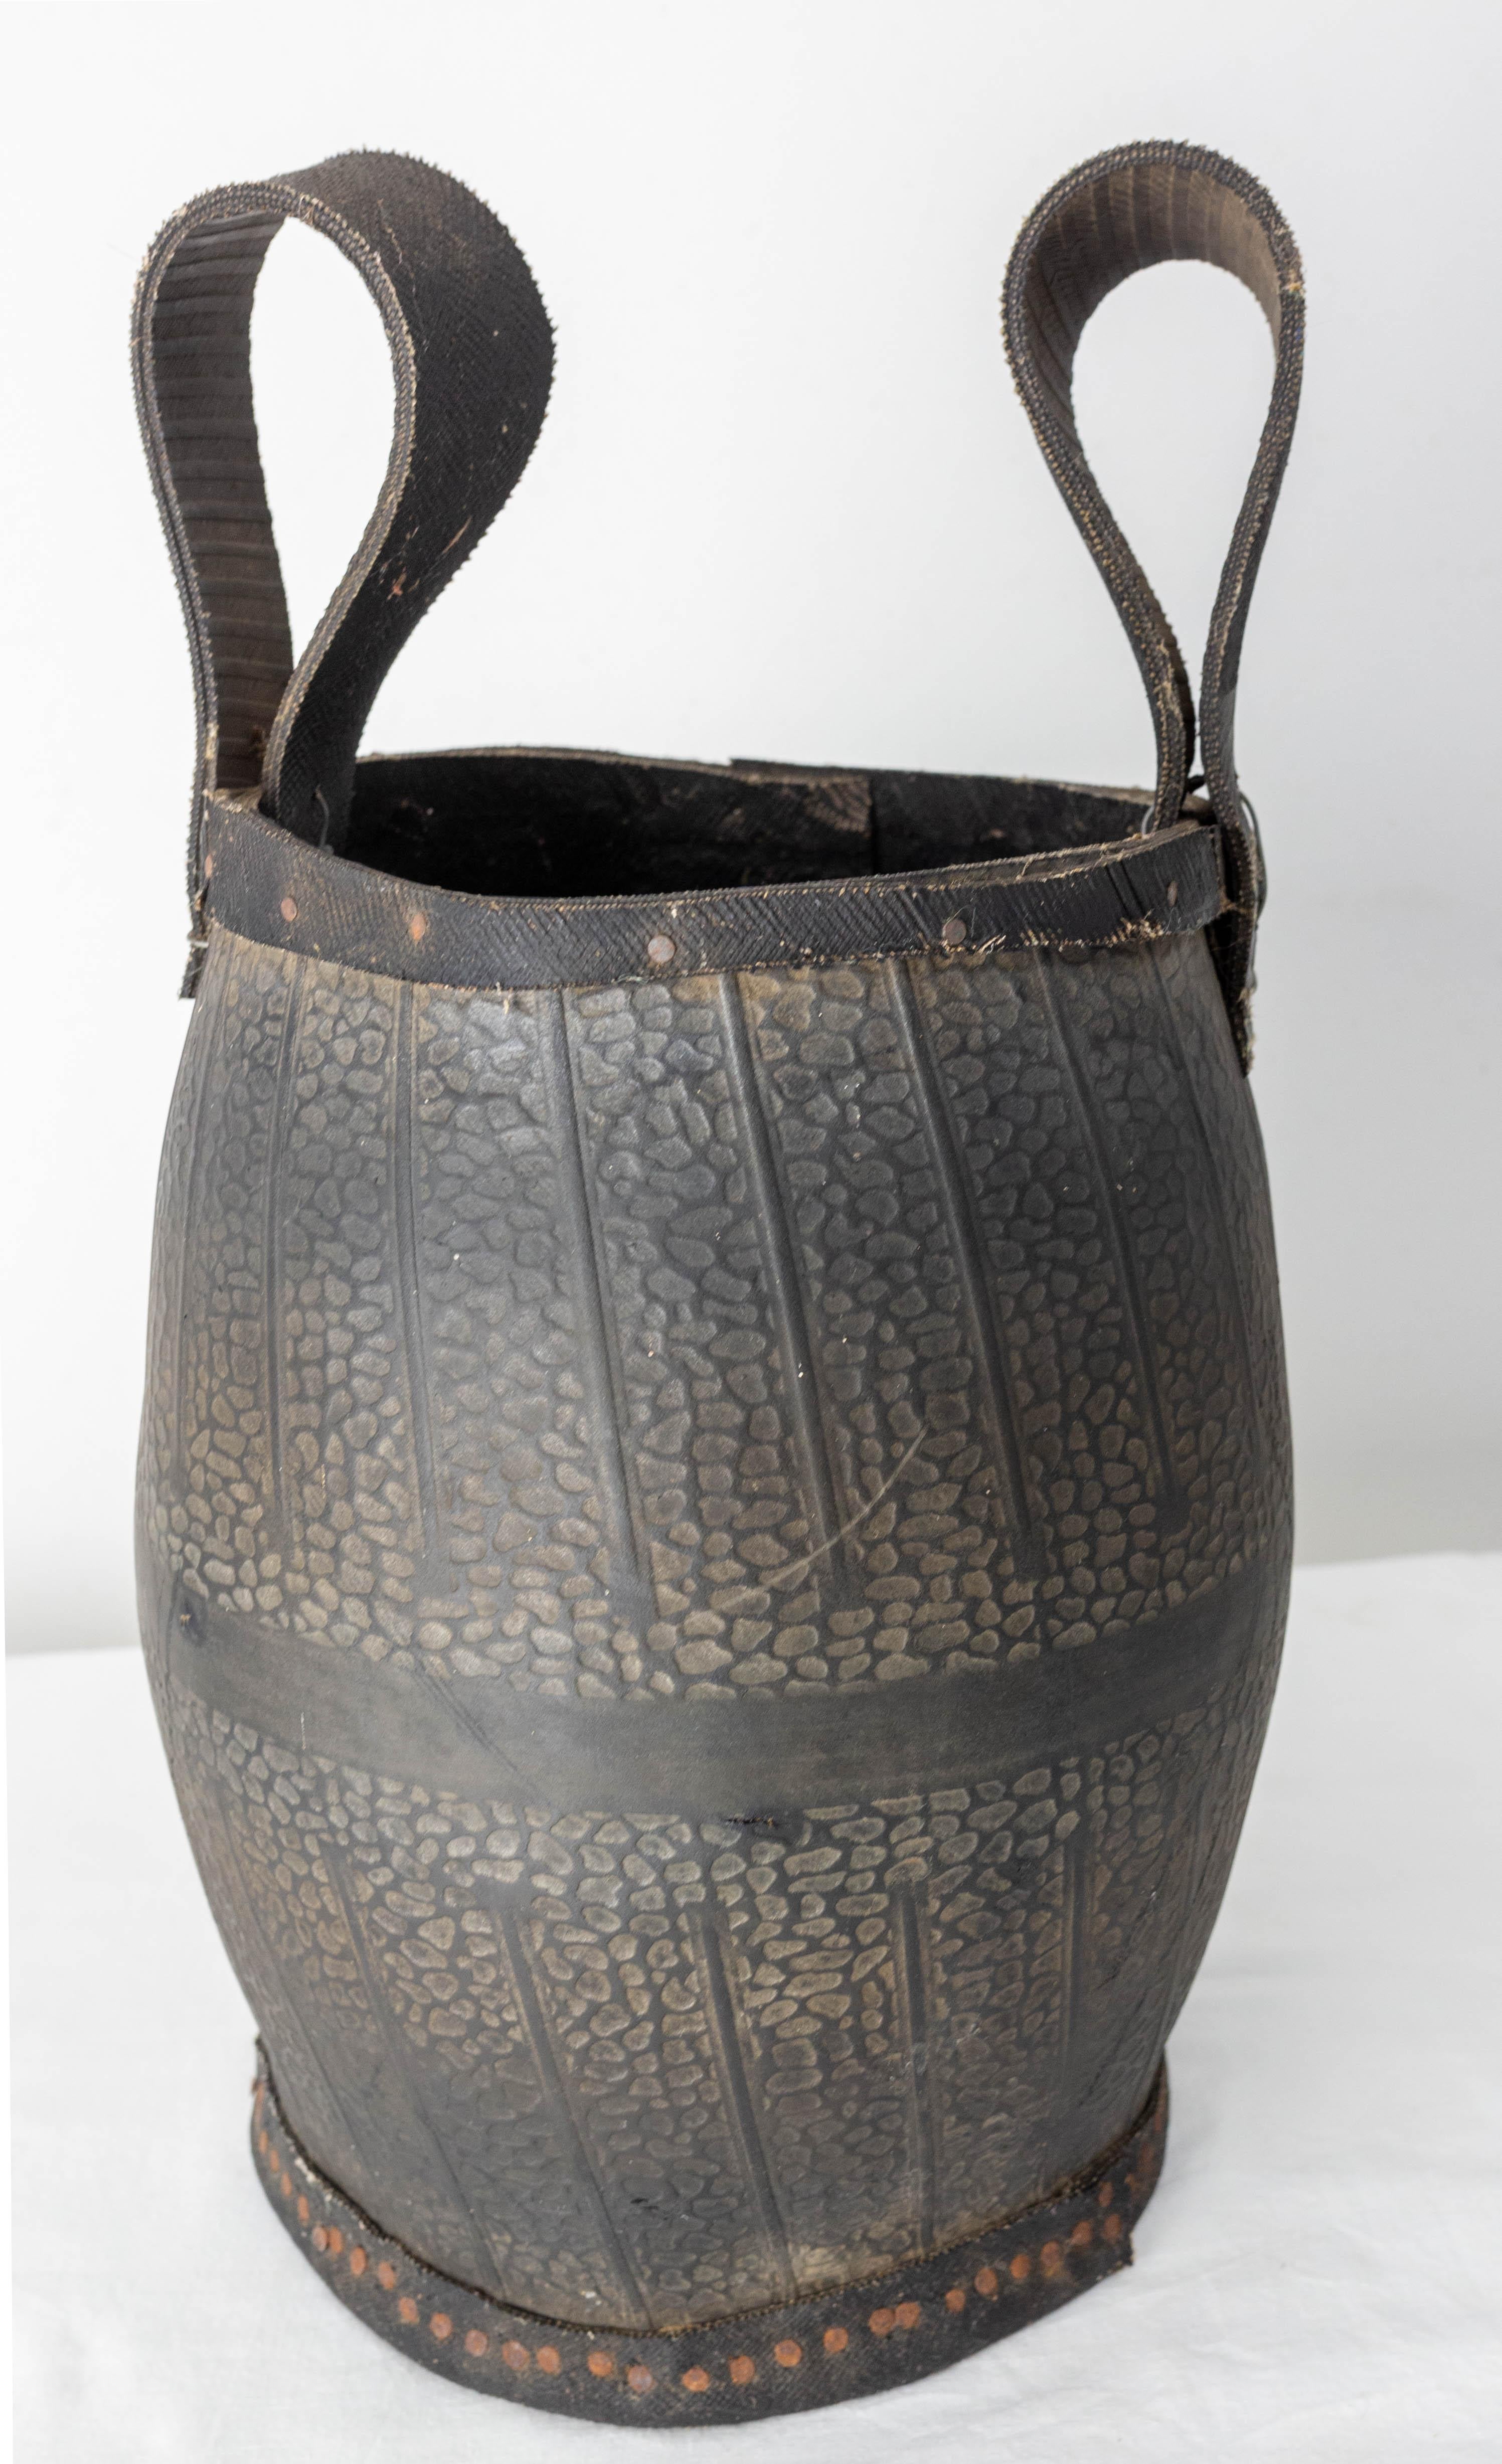 Rubber home-made basket, Portugal
It was made from tires
Historical witness object of the harsh life after war.
This can be used as a flower pot or cachepot.
Rare
Mid-century 
Dimension without the handles: 12.20 in. (31 cm)
Good